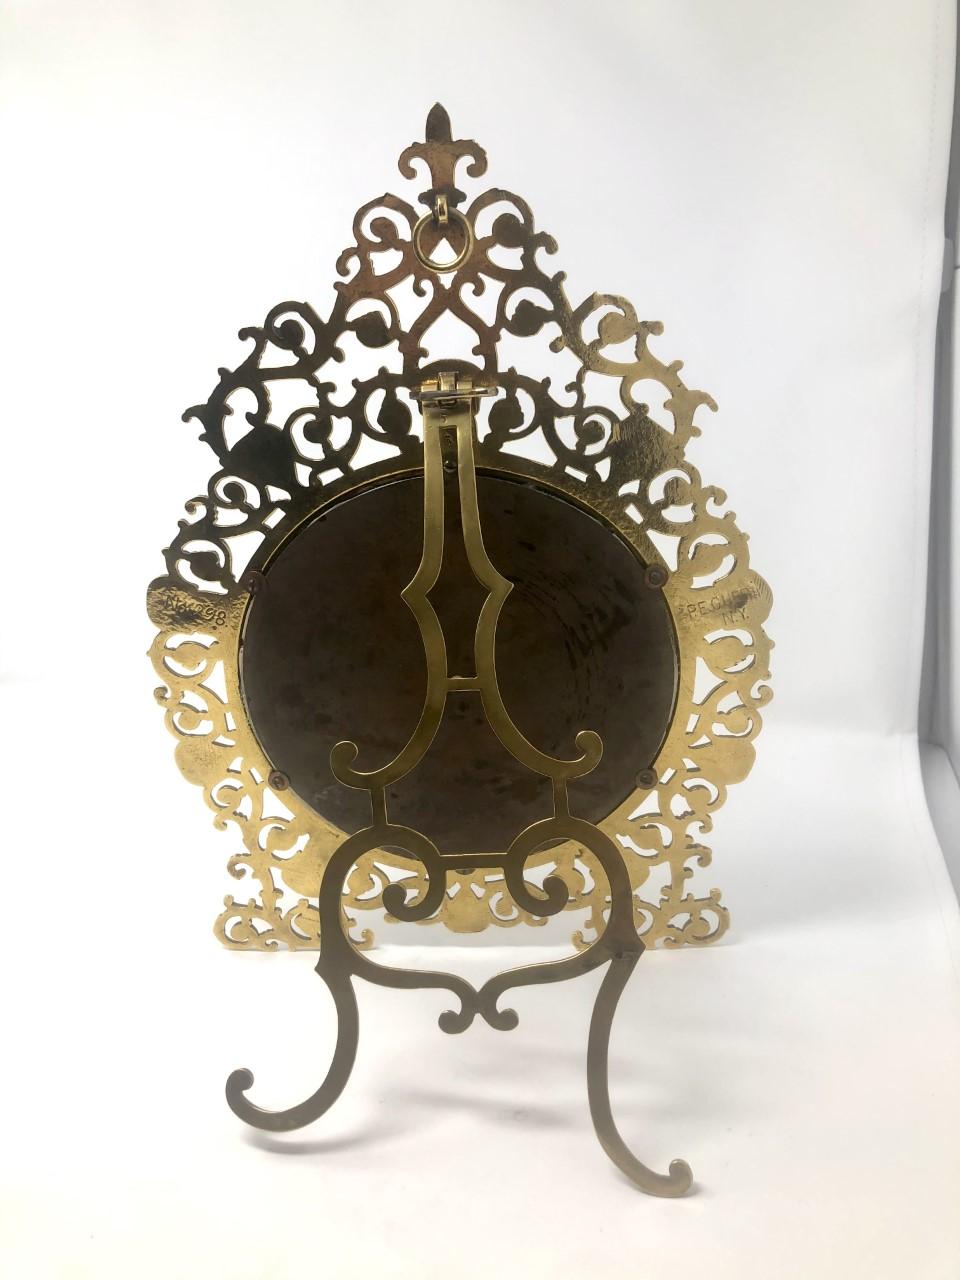 Large antique American Rococo-style with Fleur-de-Lis at top pierced brass picture frame by famous metal foundry 